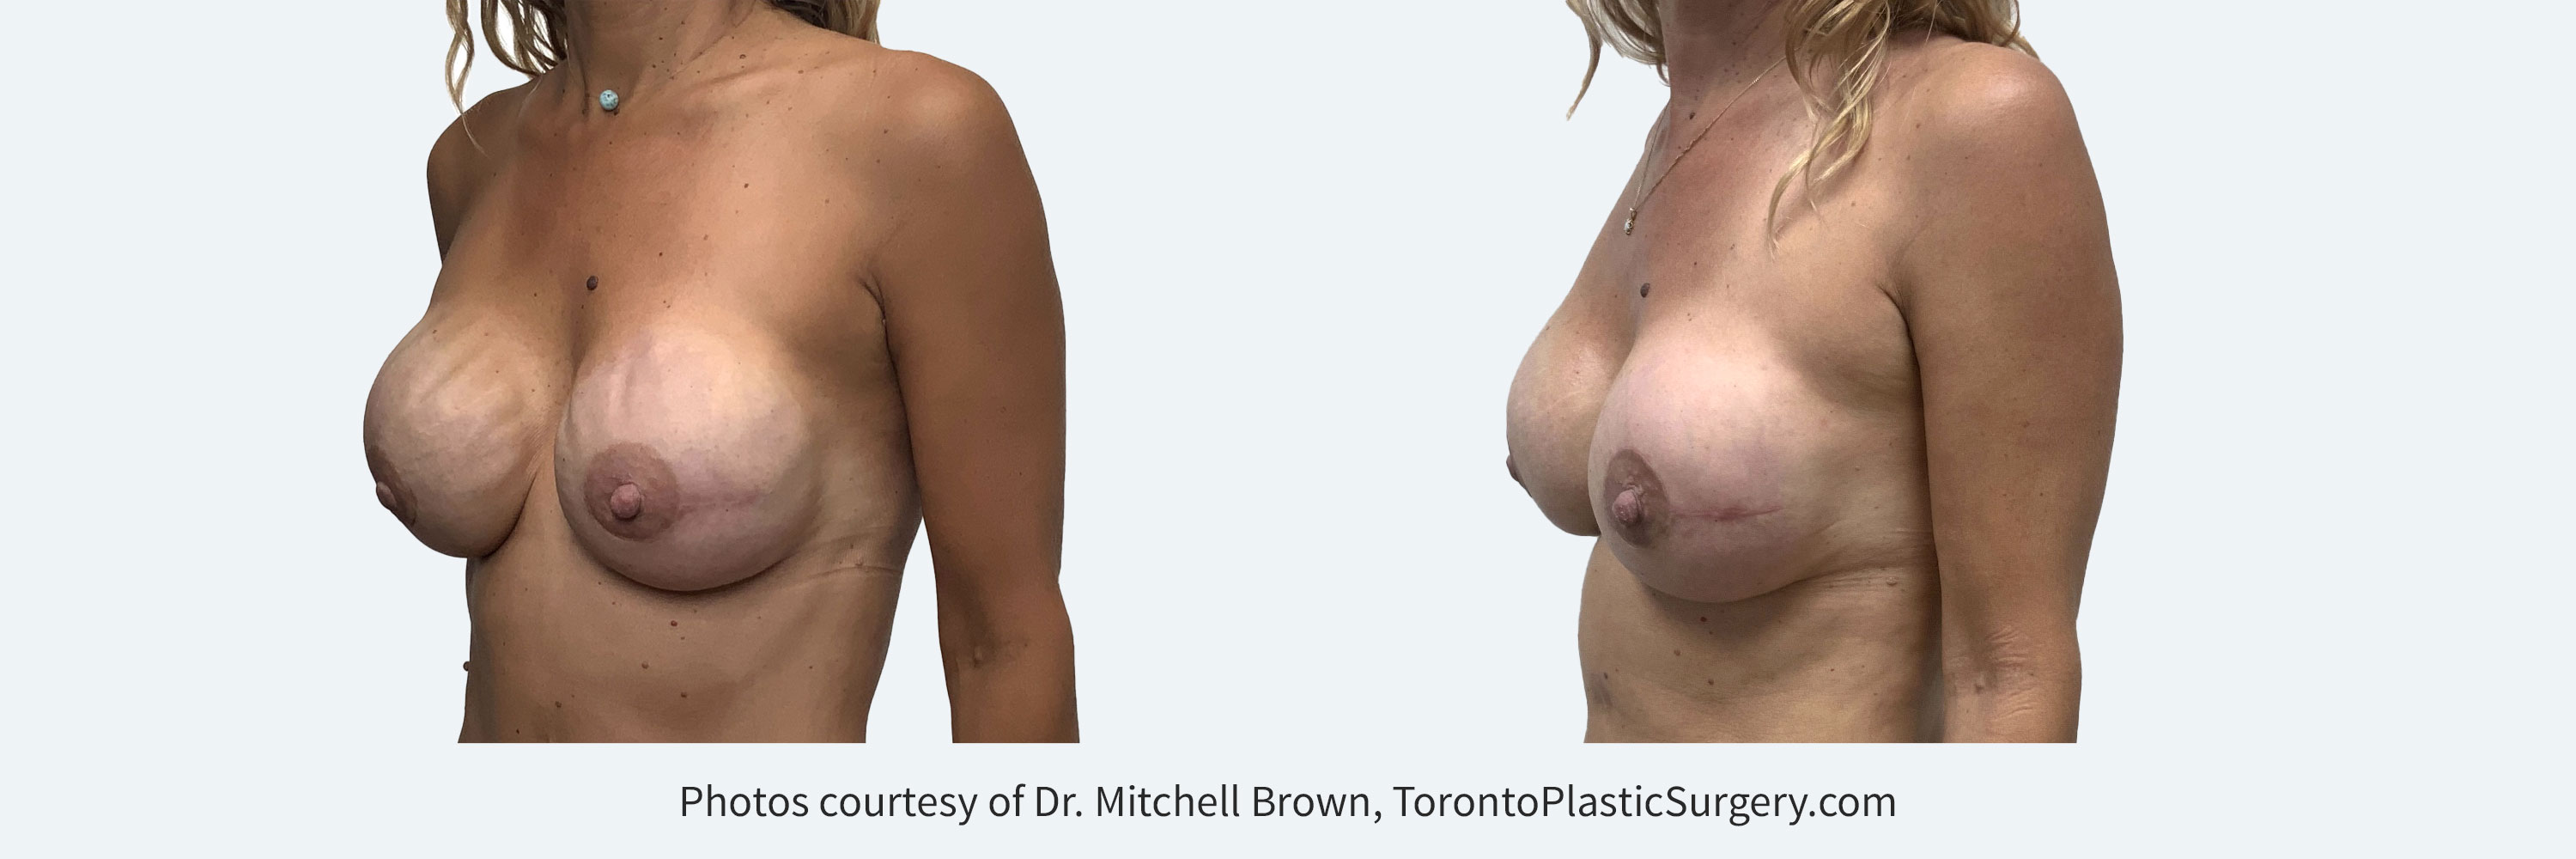 Nipple-sparing mastectomy reconstructed using breast implants with severe visible rippling. Corrected with a combination of more highly cohesive implants, fat grafting and insertion of an internal sling for implant support. Before and 6 months after.